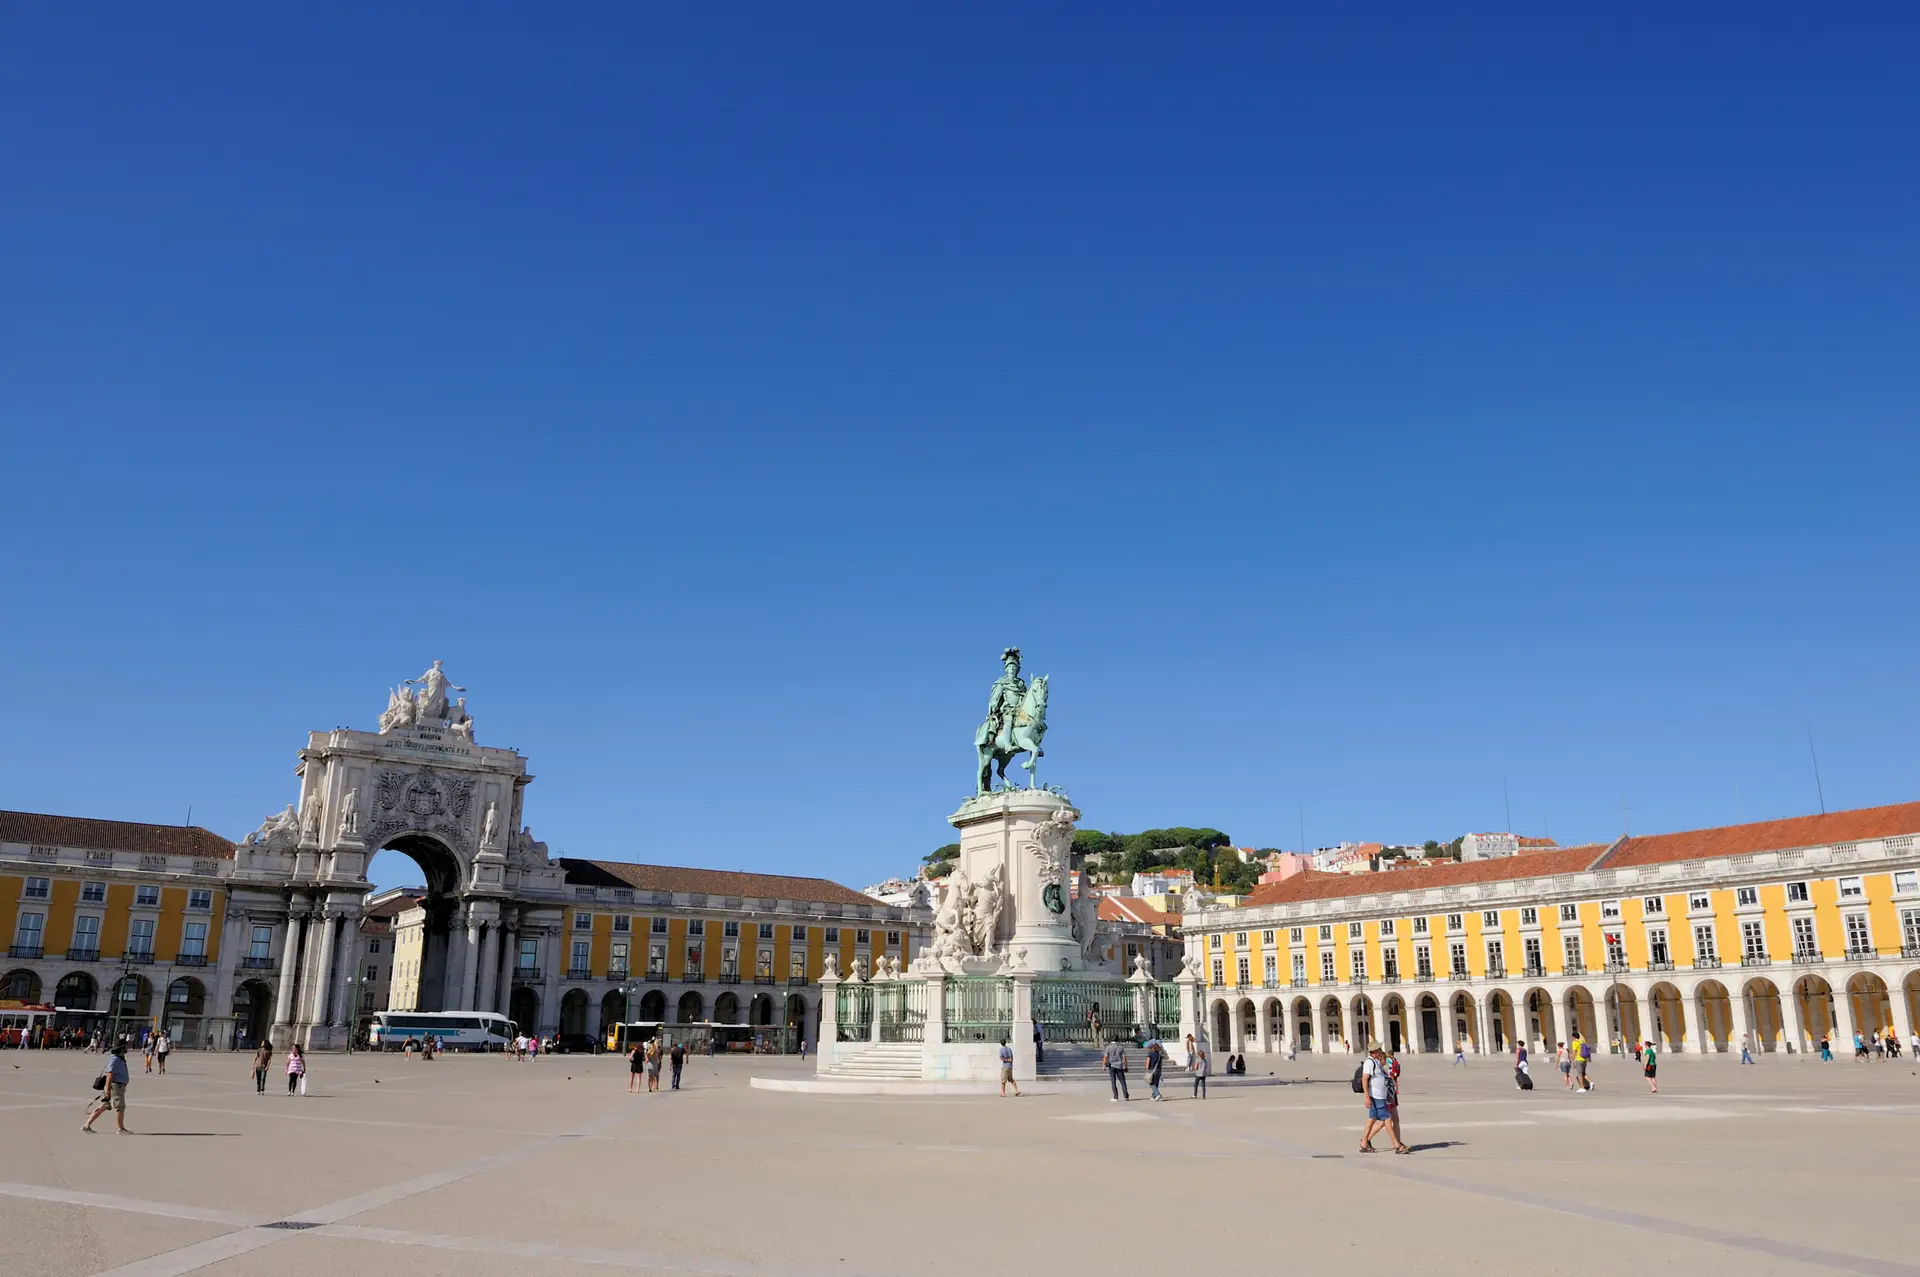 LISBON, PORTUGAL – AUGUST 21 : The Praça do Comercio or Terreiro do Paço (Commerce Square) is located near the Tagus river, in Lisbon in August 21, 2014 in Lisbon, Portugal. (Photo by Frédéric Soltan/Corbis via Getty Images)